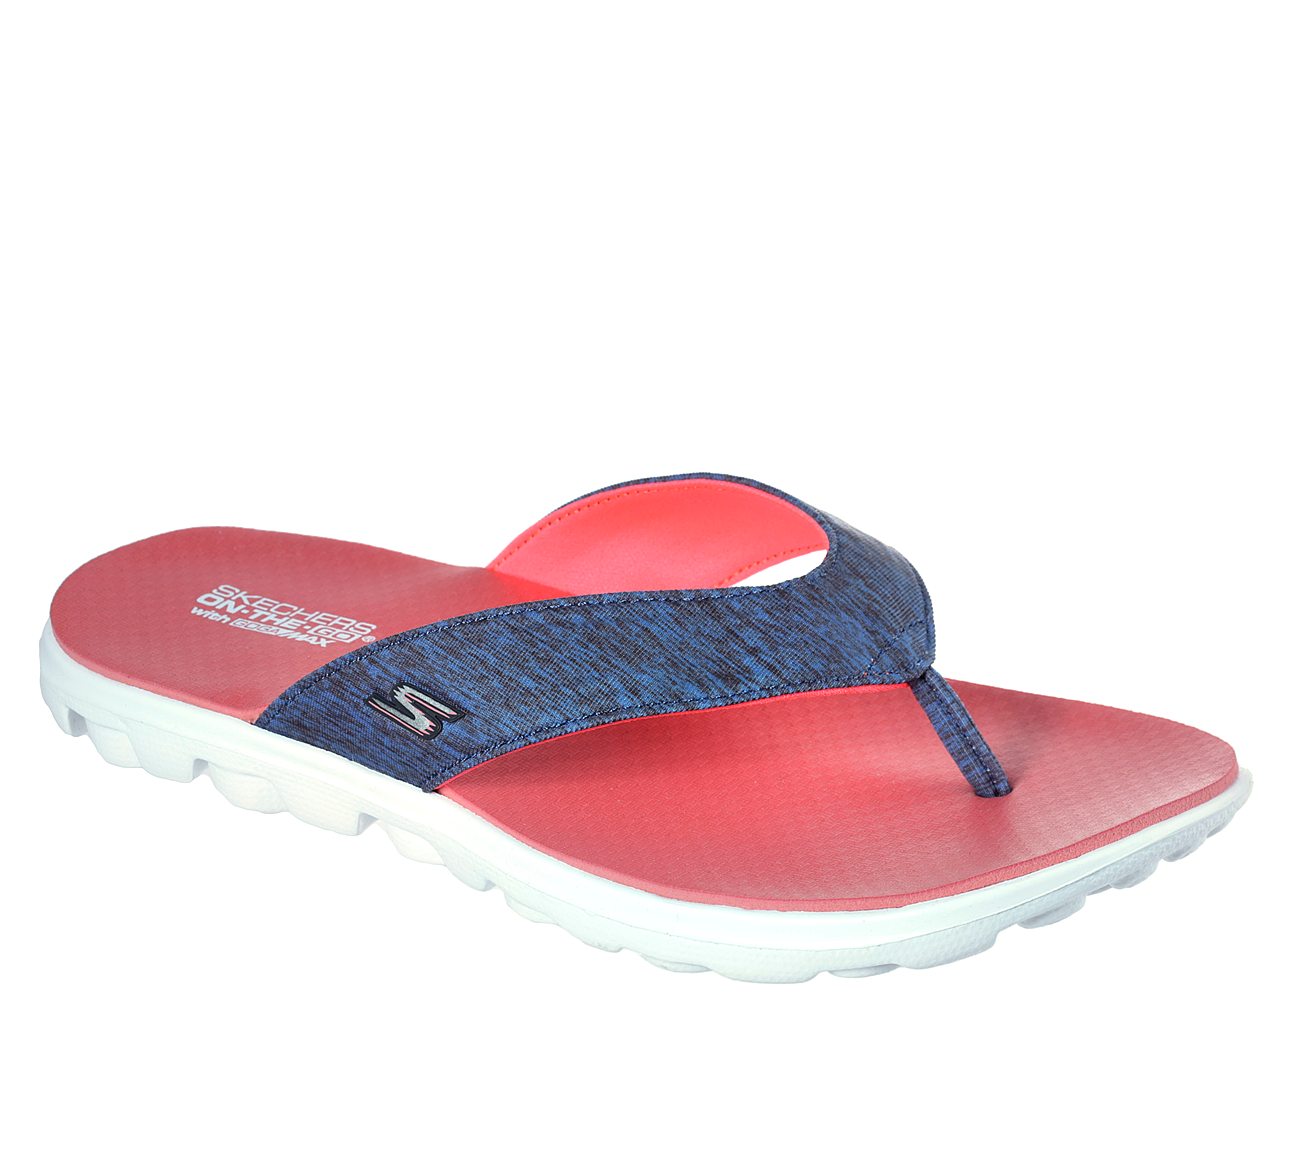 ON-THE-GO-MAUI, NAVY/PINK Footwear Lateral View